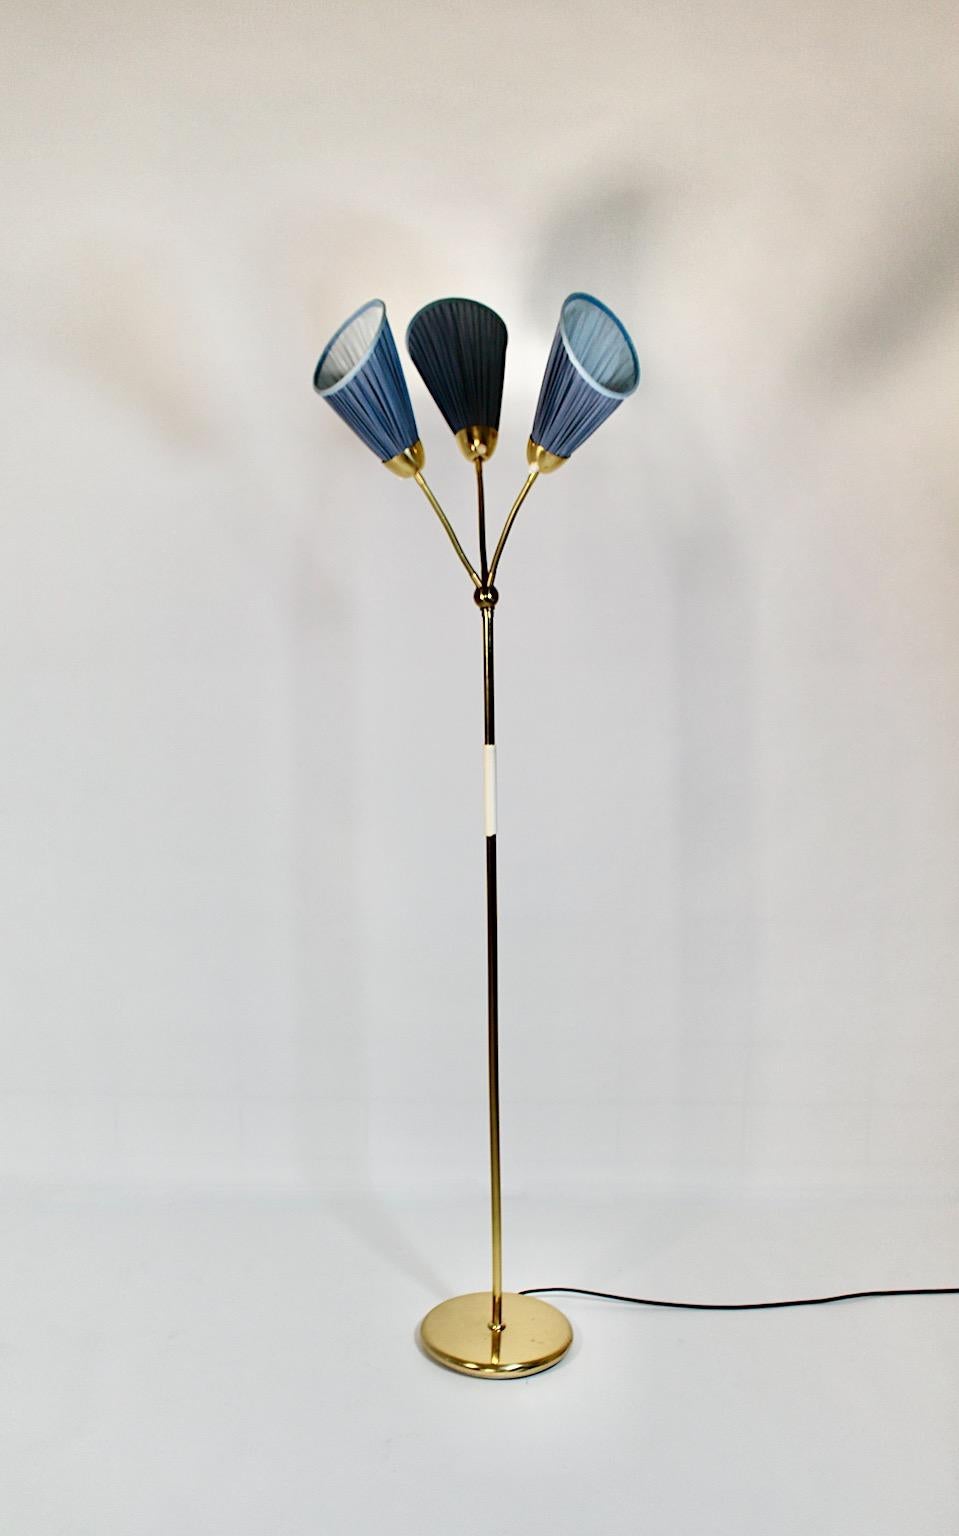 Mid-Century Modern vintage brass floor lamp by J.T.Kalmar, 1950s, Vienna.
A beautiful and elegant floor lamp from brass and brass encased iron base for a safe standing manufactured by J.T.Kalmar 1950s.
This model is very similar to a floor lamp